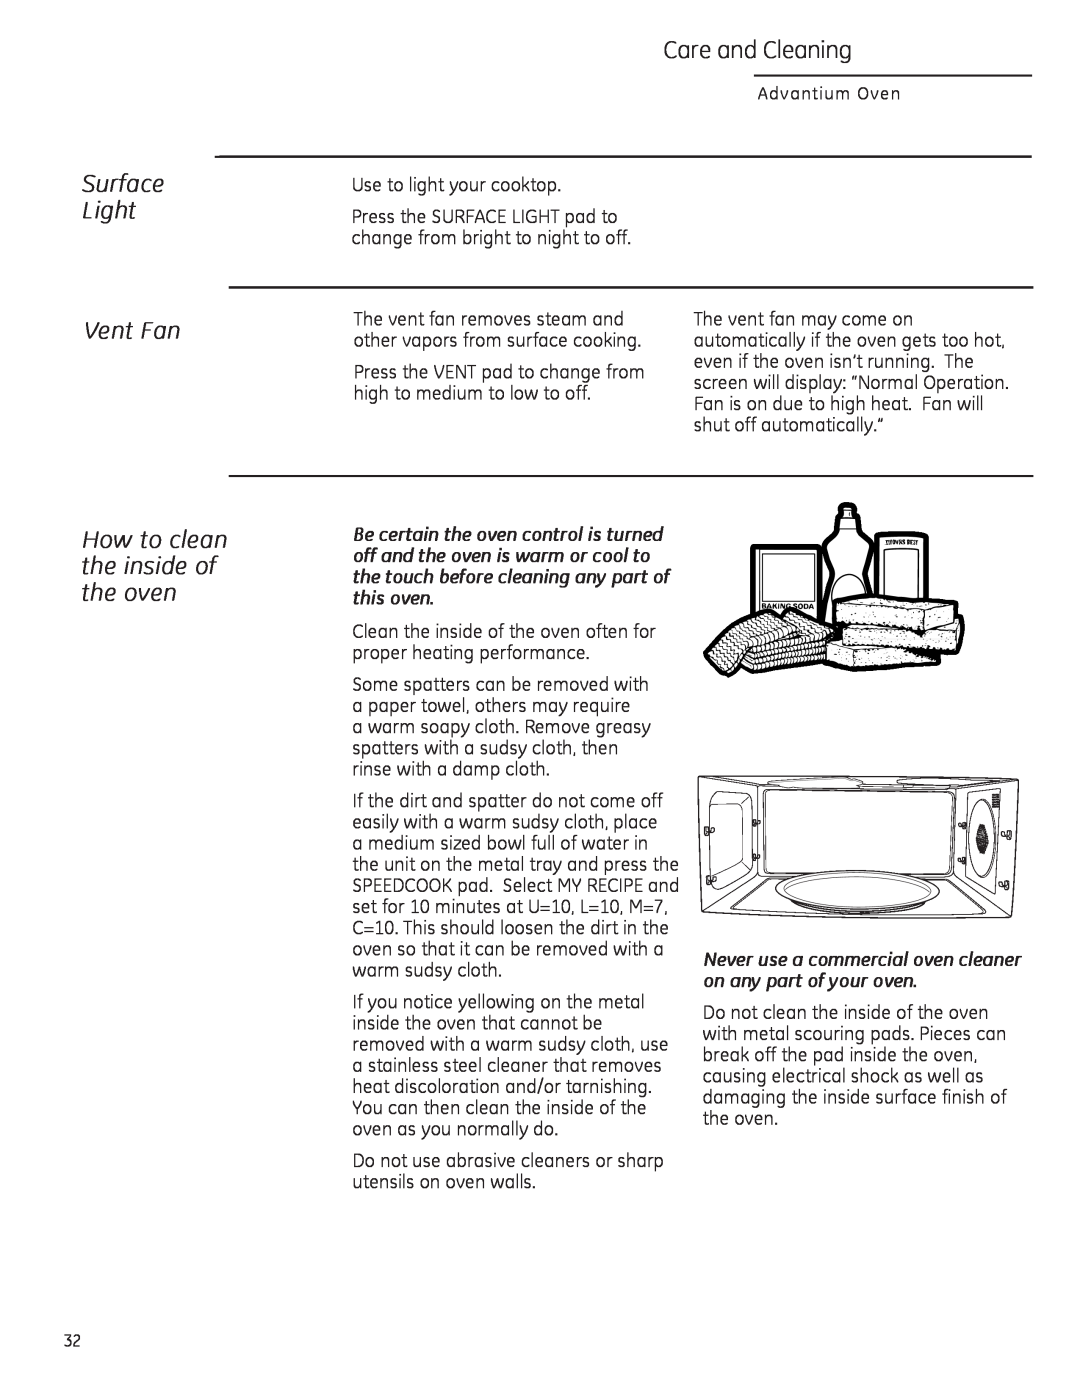 GE ZSA2201 owner manual Surface Light Vent Fan, Care and Cleaning, How to clean the inside of the oven 